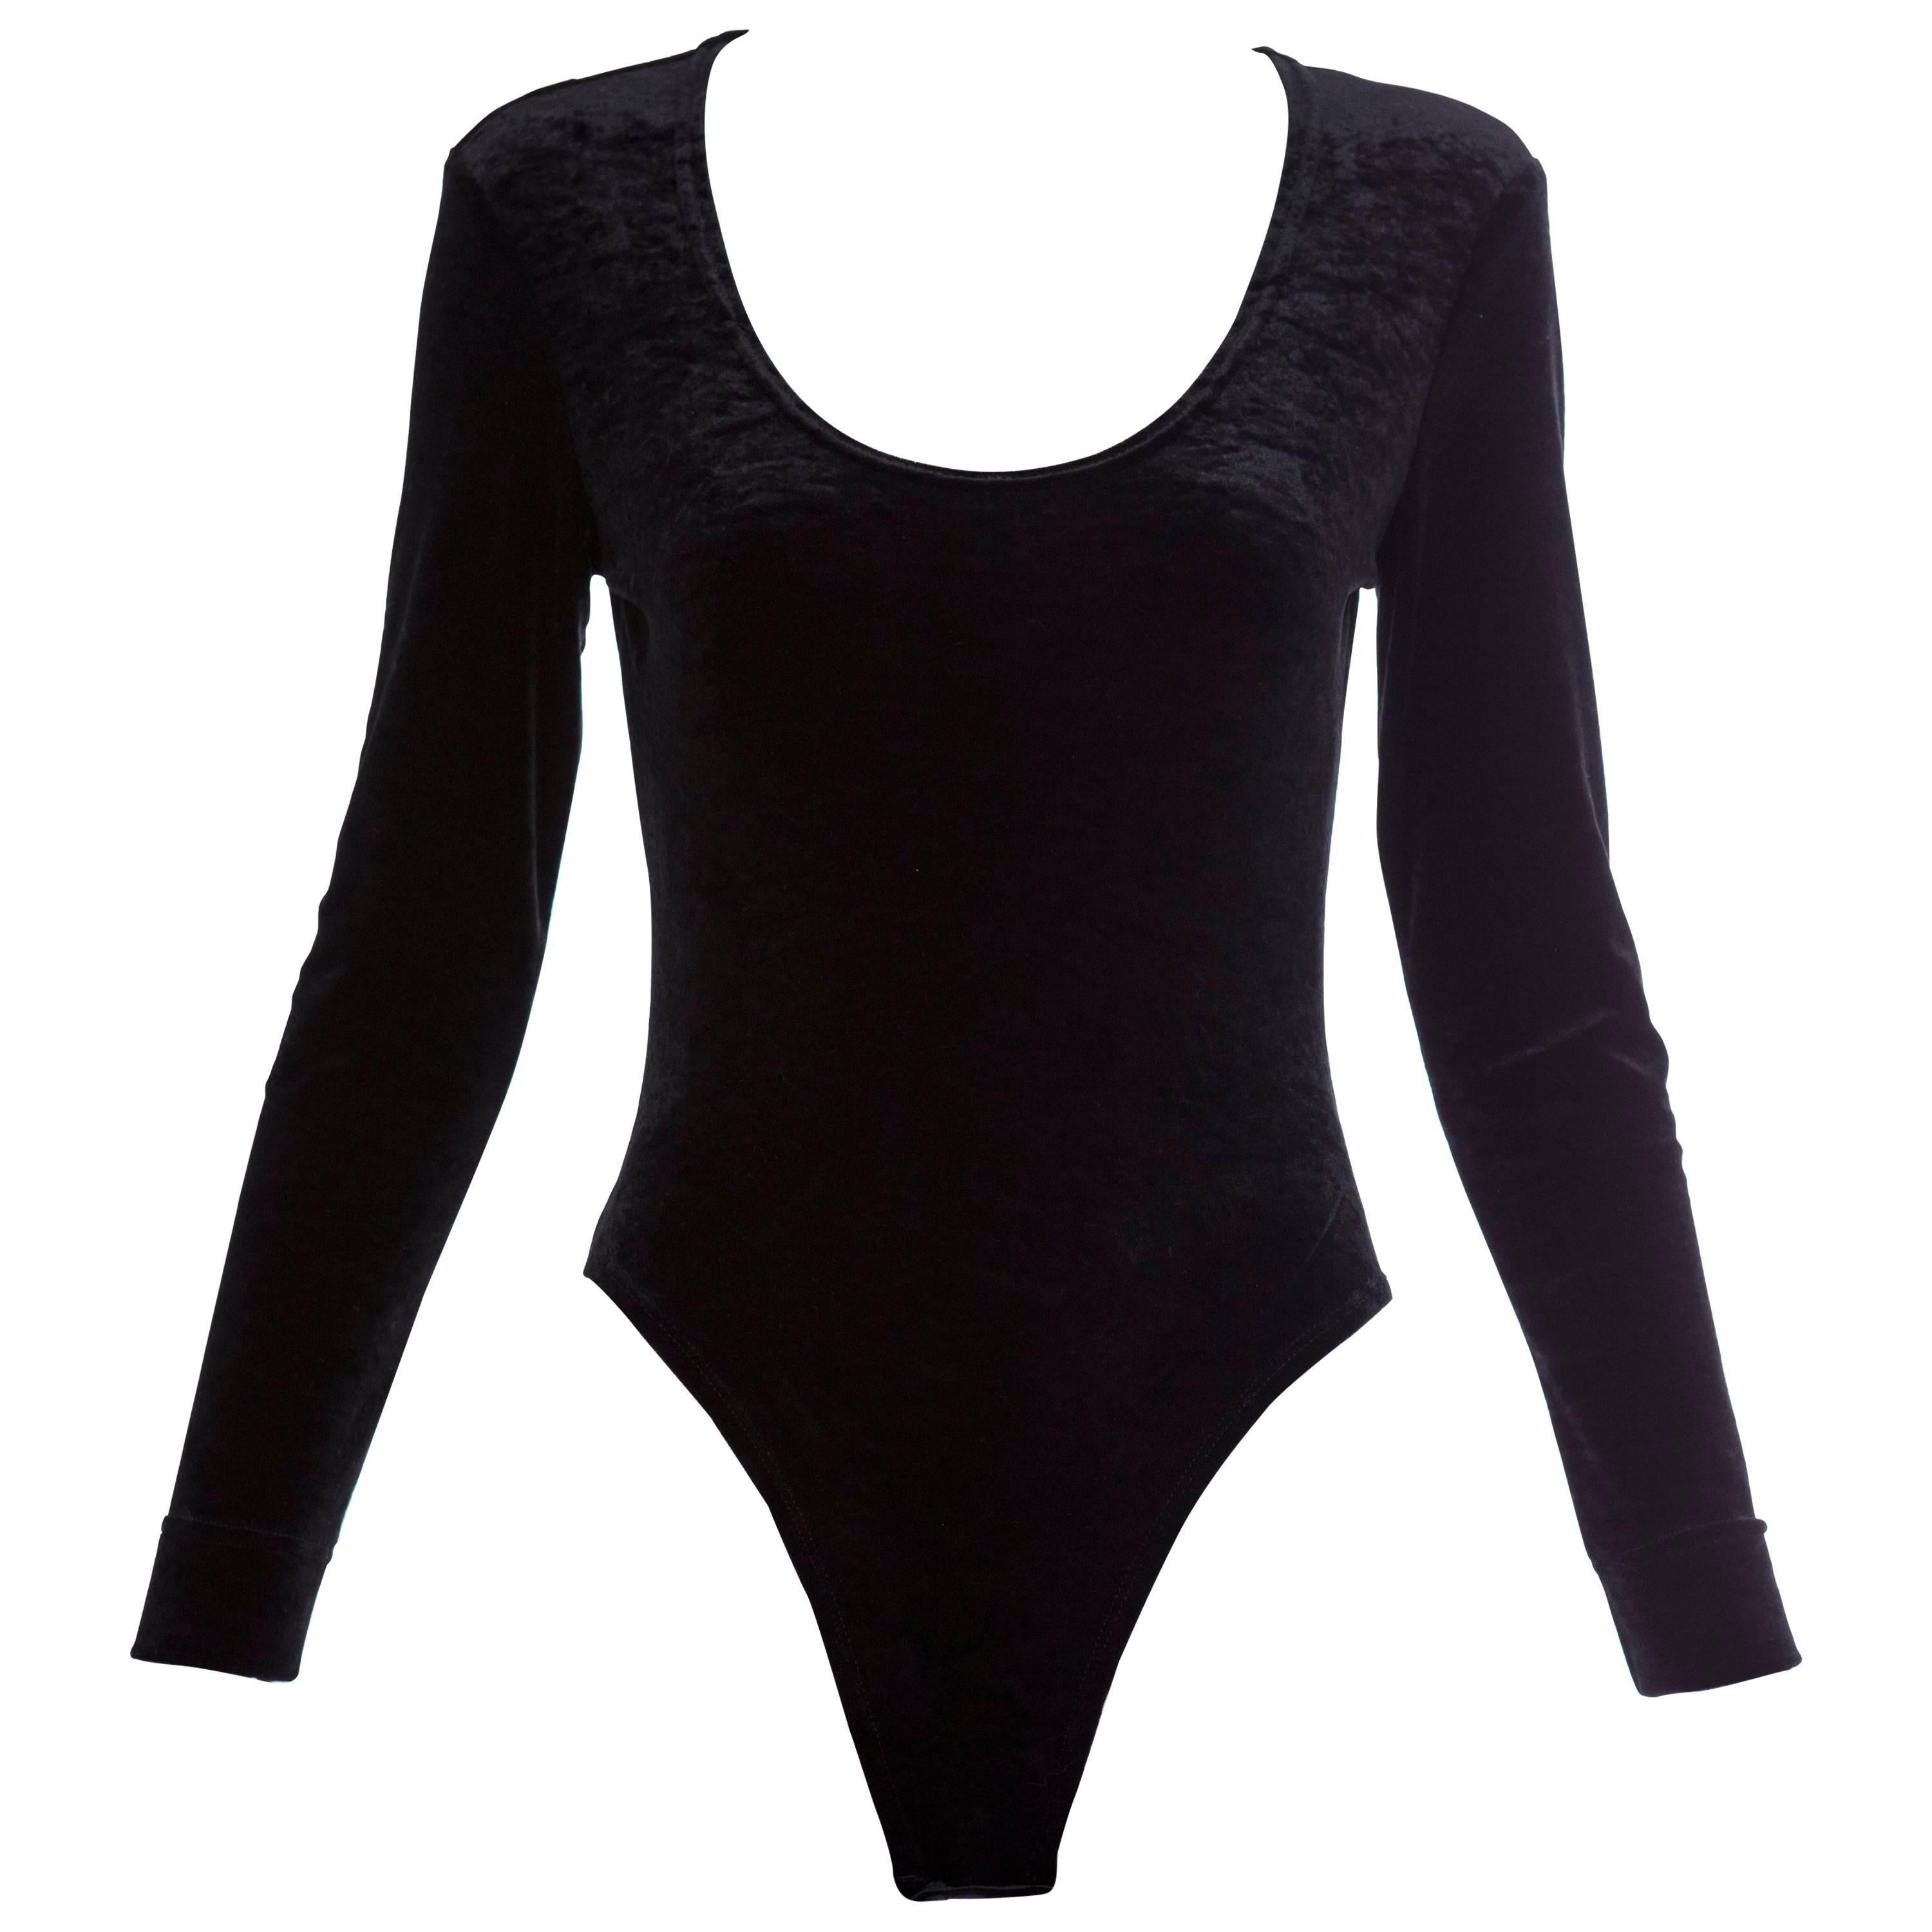 Cheap And Chic By Moschino Black Nylon Spandex Velvet Bodysuit, Early 2000s For Sale